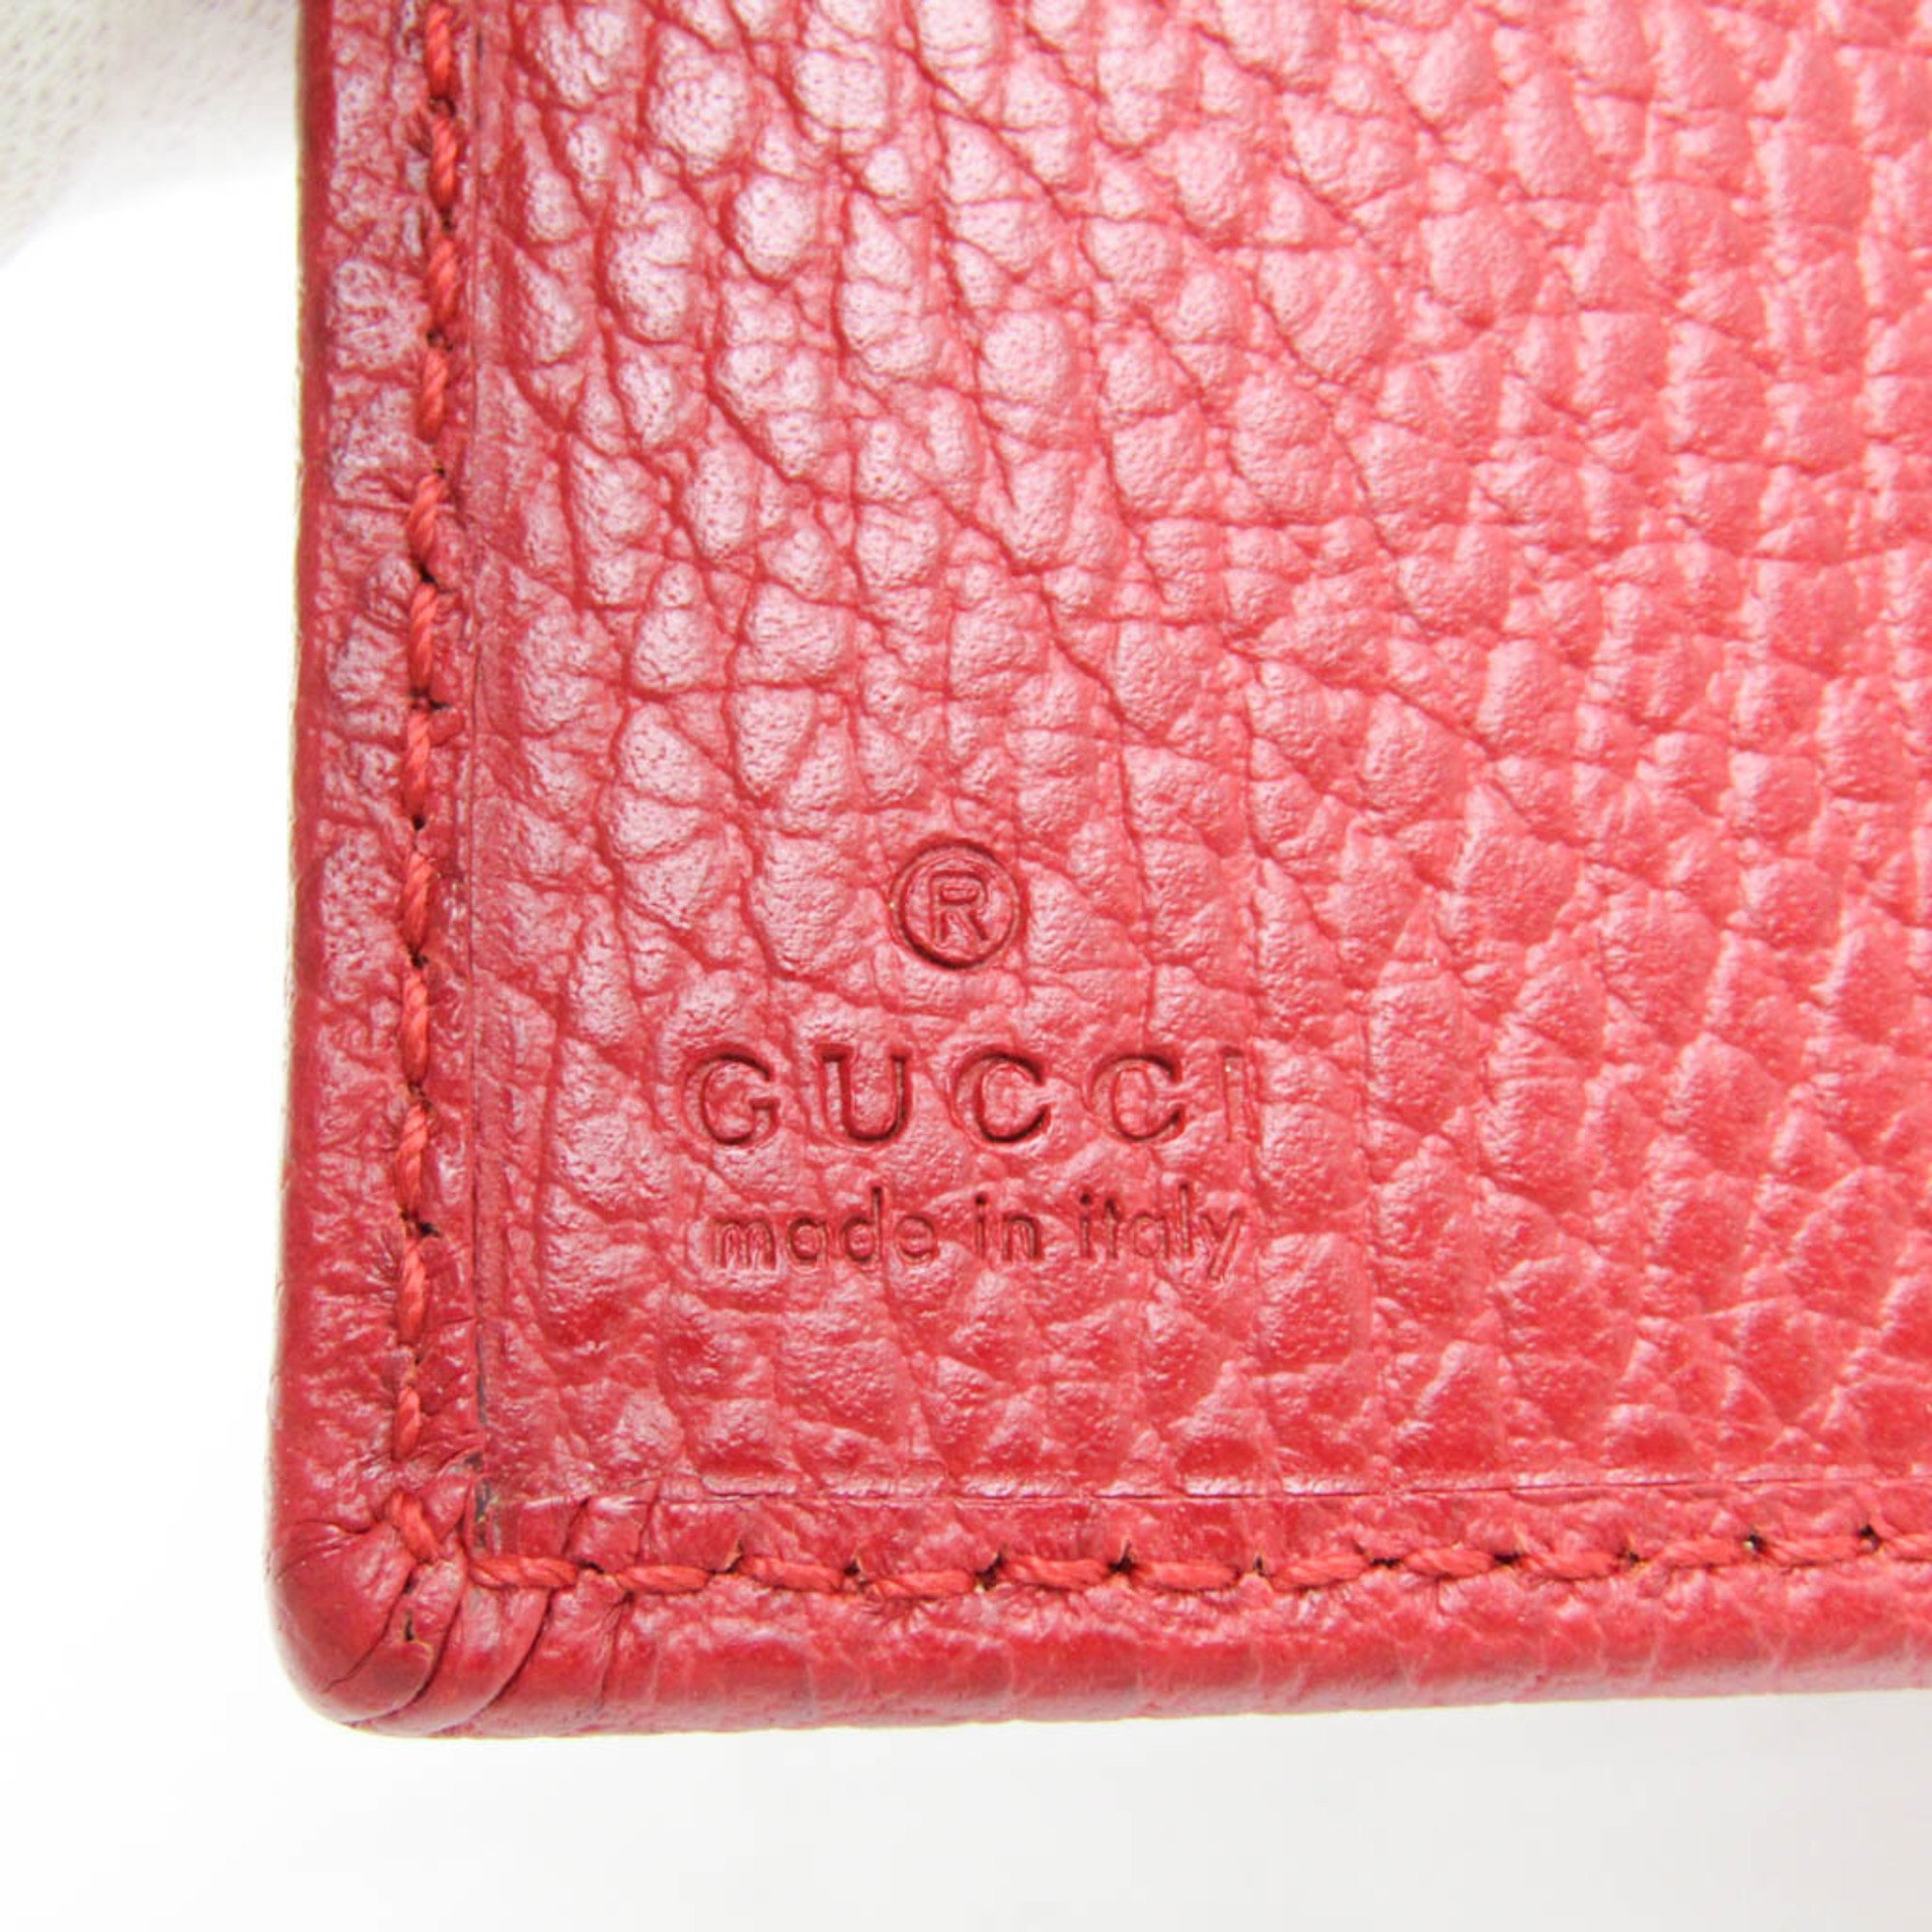 Gucci PETITE MARMONT 546588 Women's Leather Middle Wallet (bi-fold) Red Color